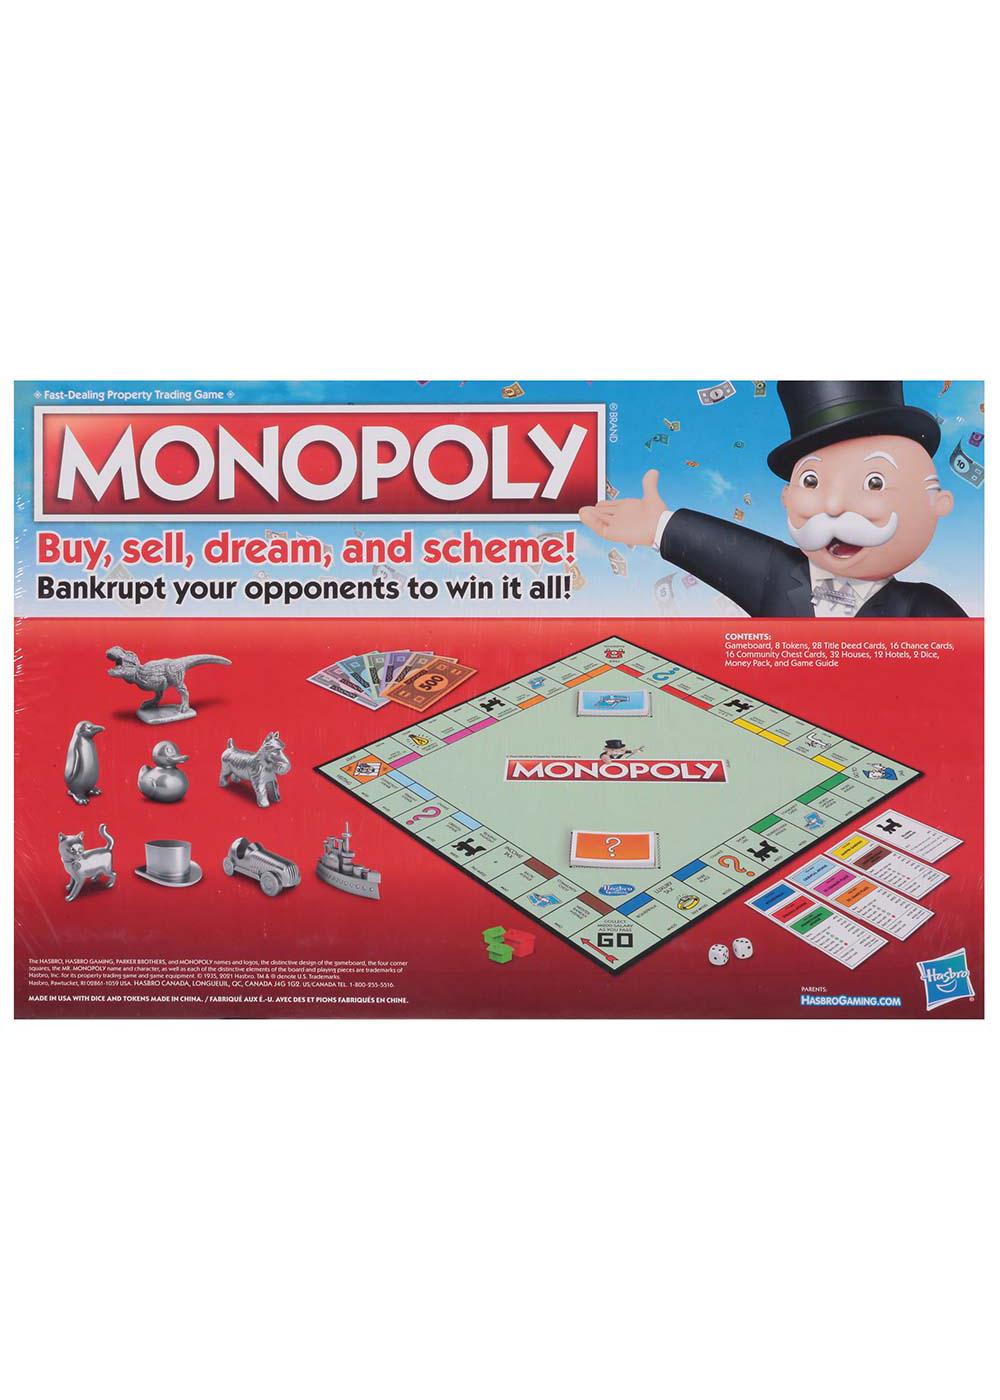 MONOPOLY CLASSIC by HASBRO, INC.